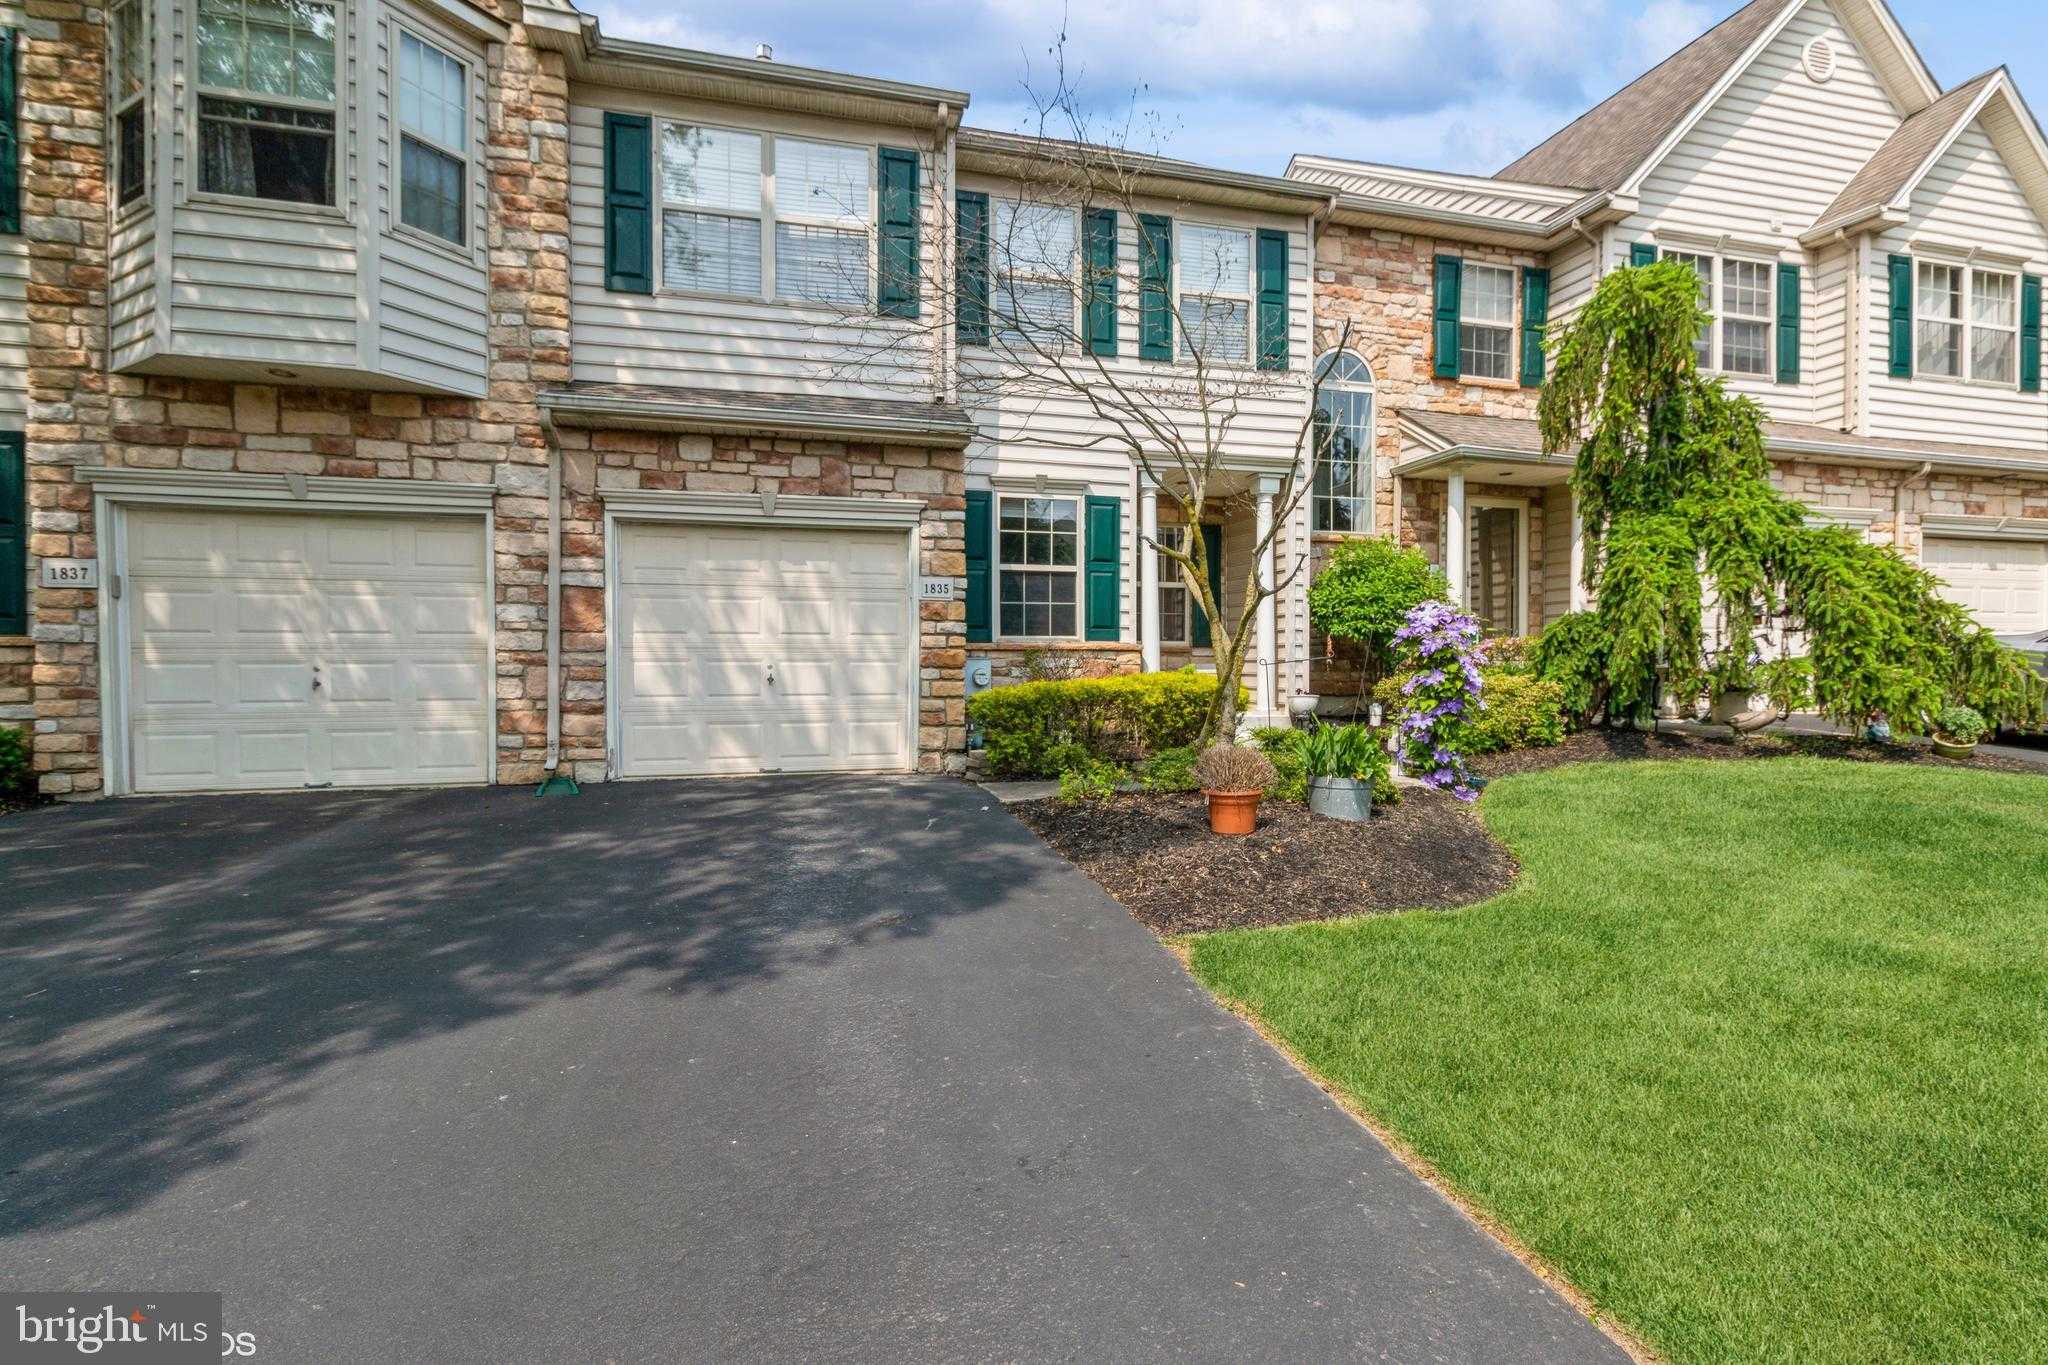 View JAMISON, PA 18929 townhome